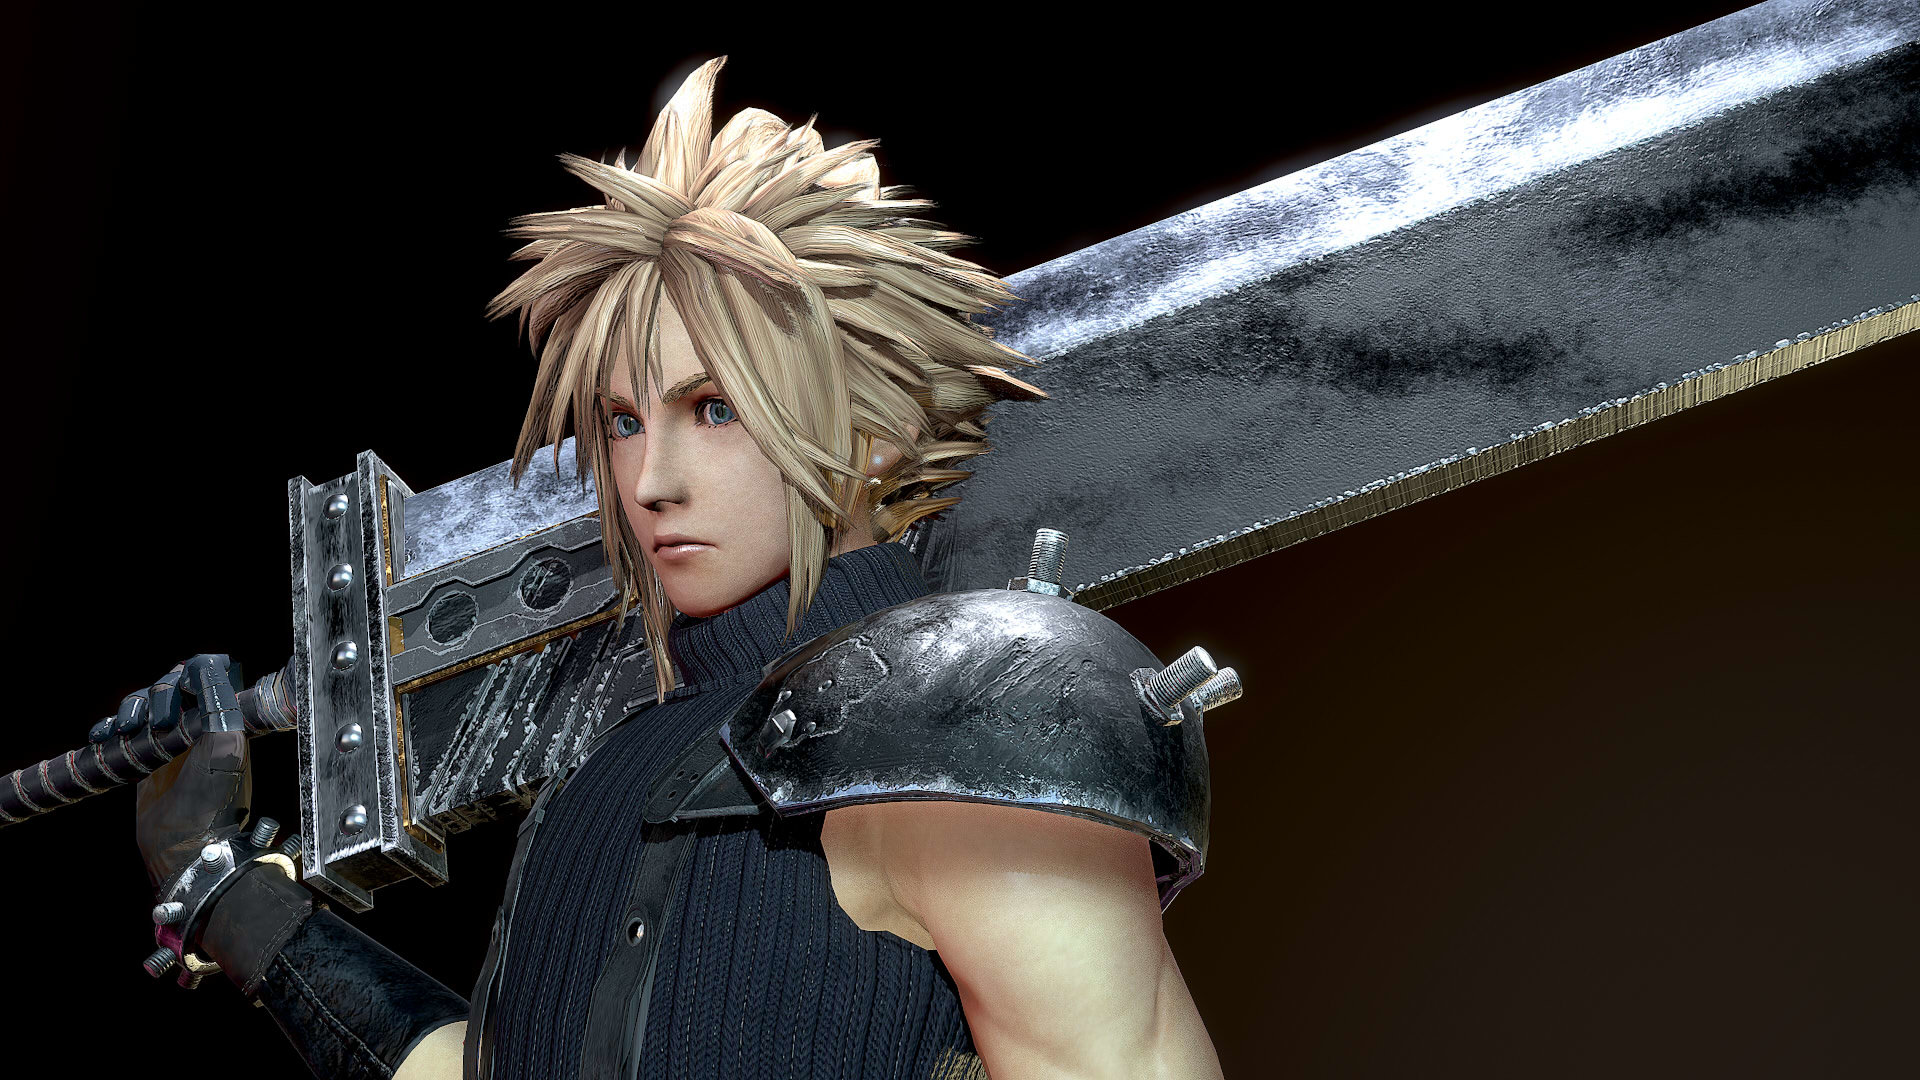 Cloud Strife from FINAL FANTASY 7 